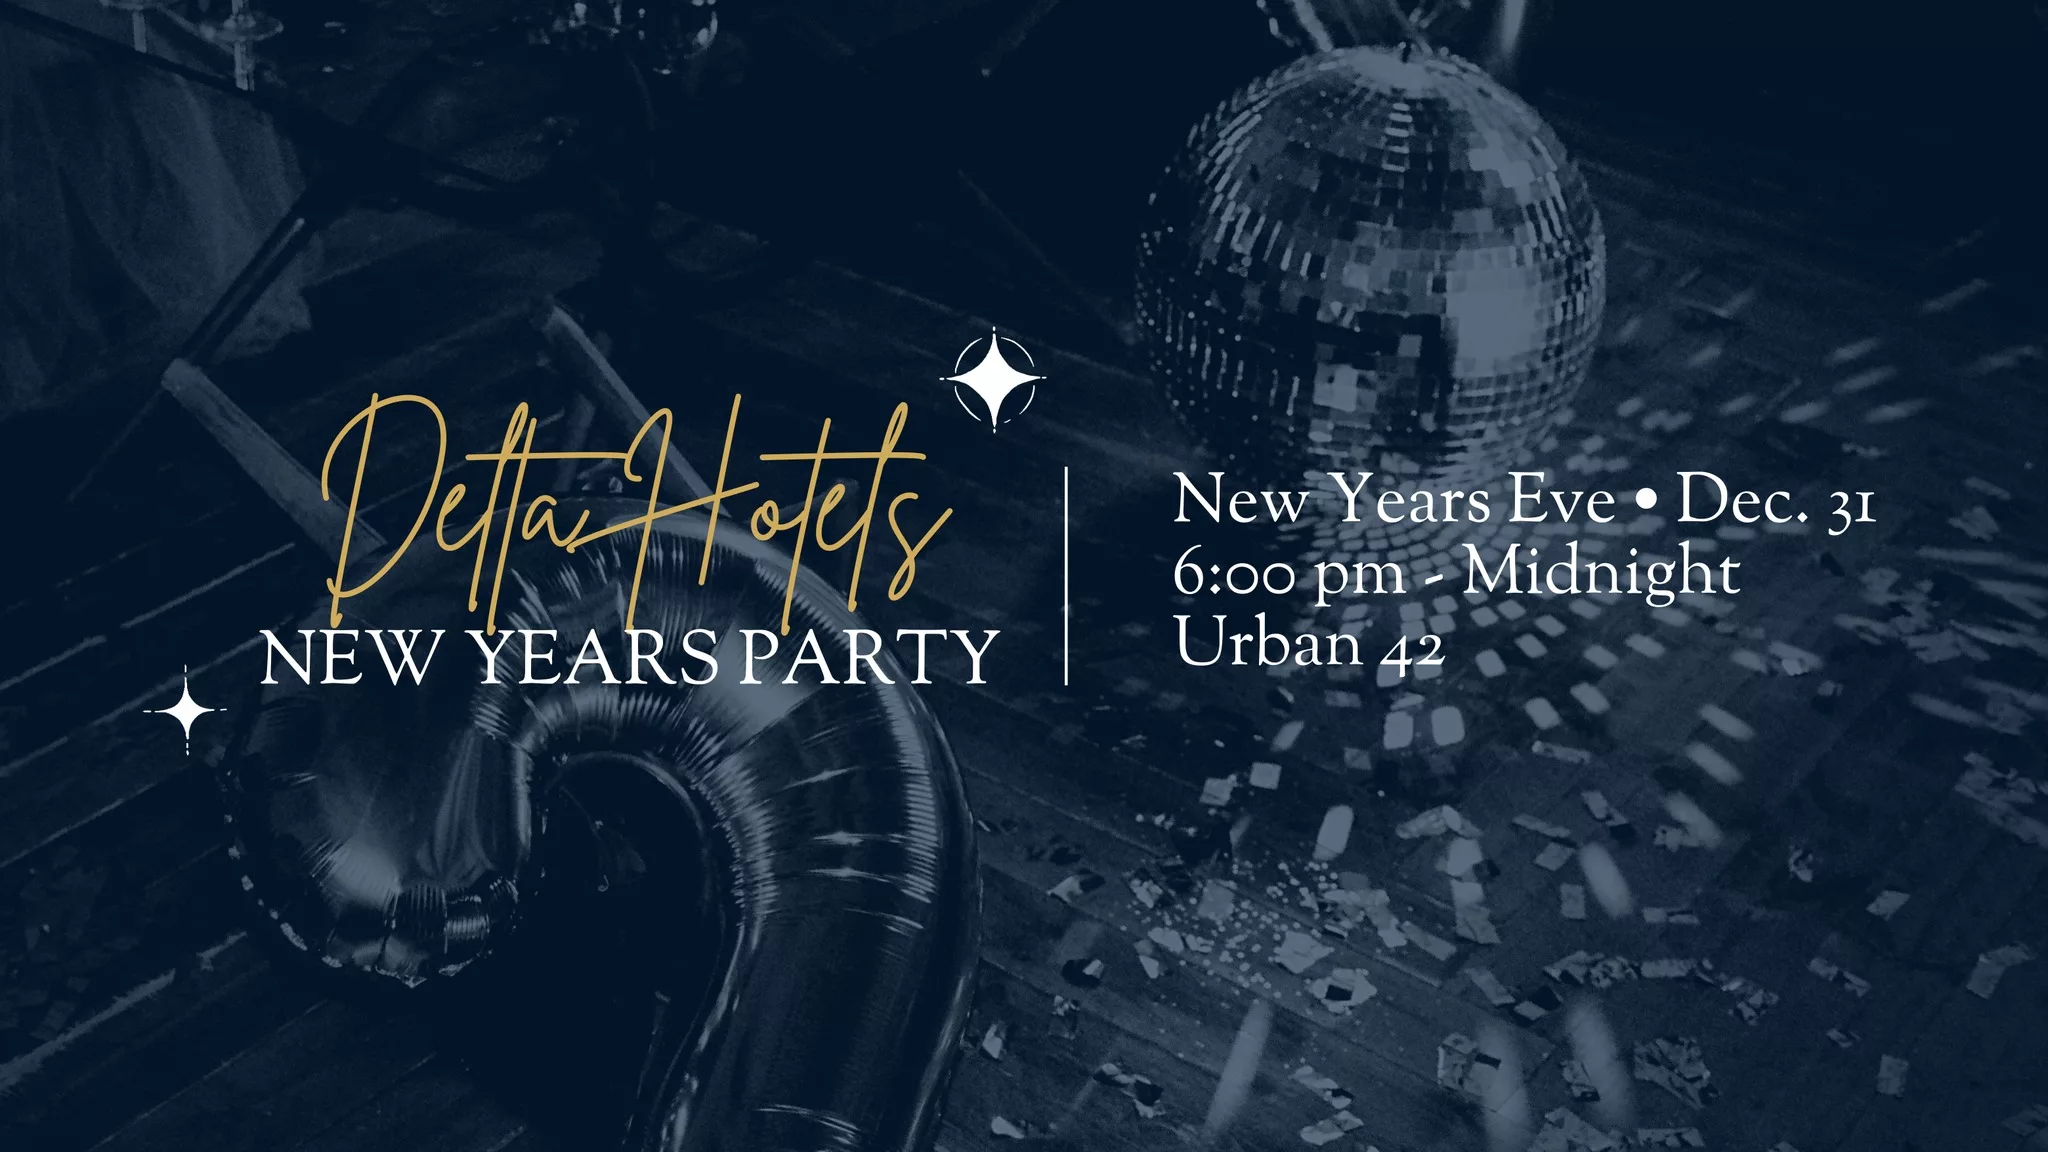 New Years Eve Party | Urban 42